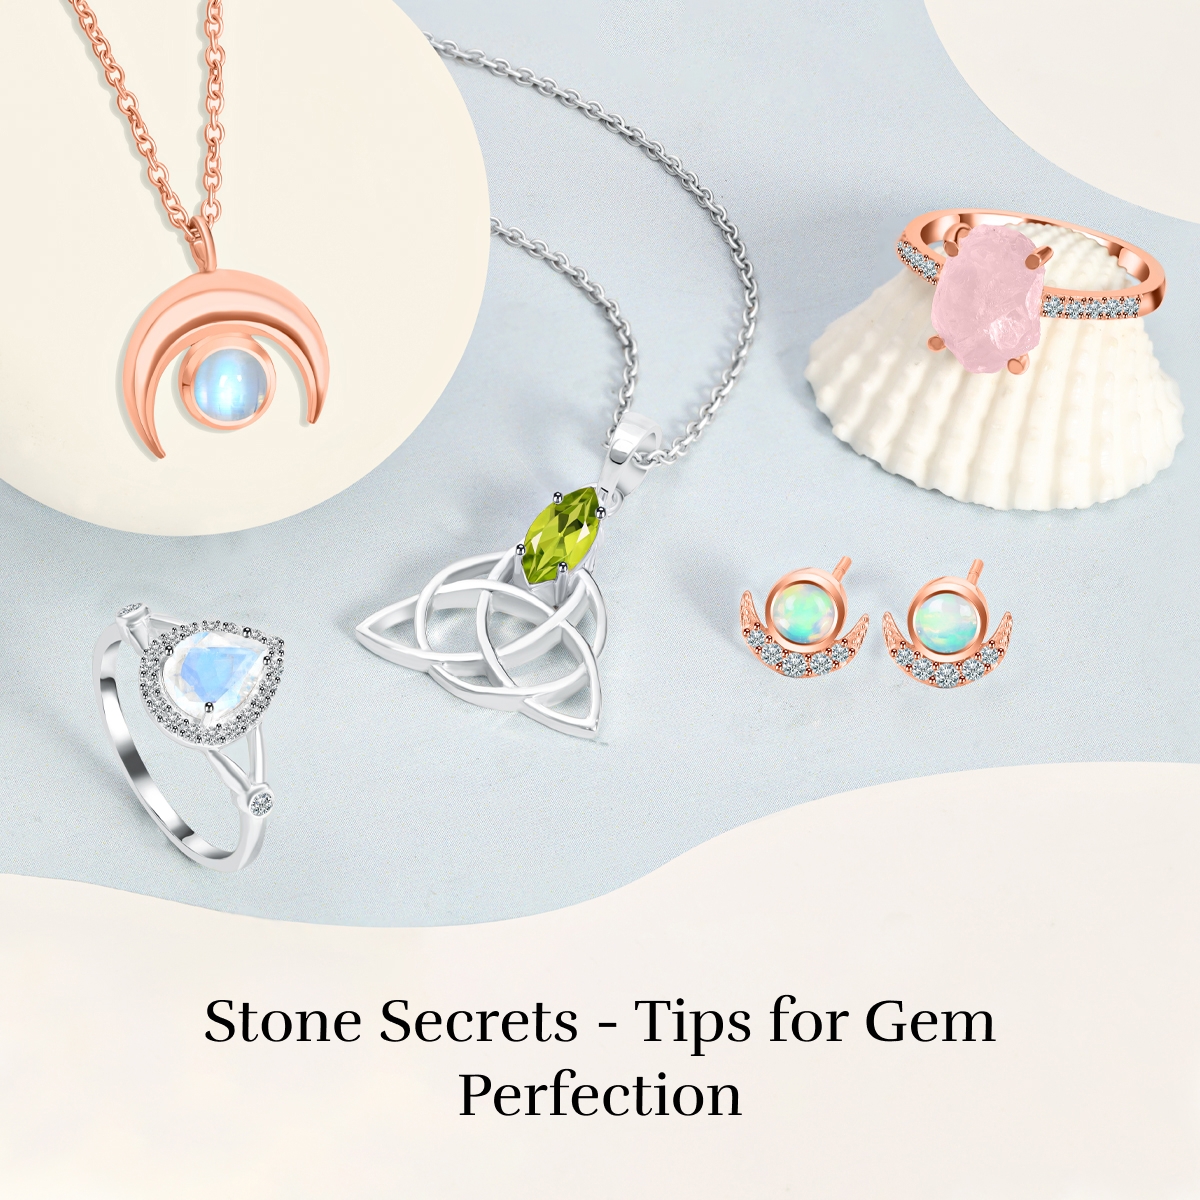 Tips for Maintaining Your Gemstone